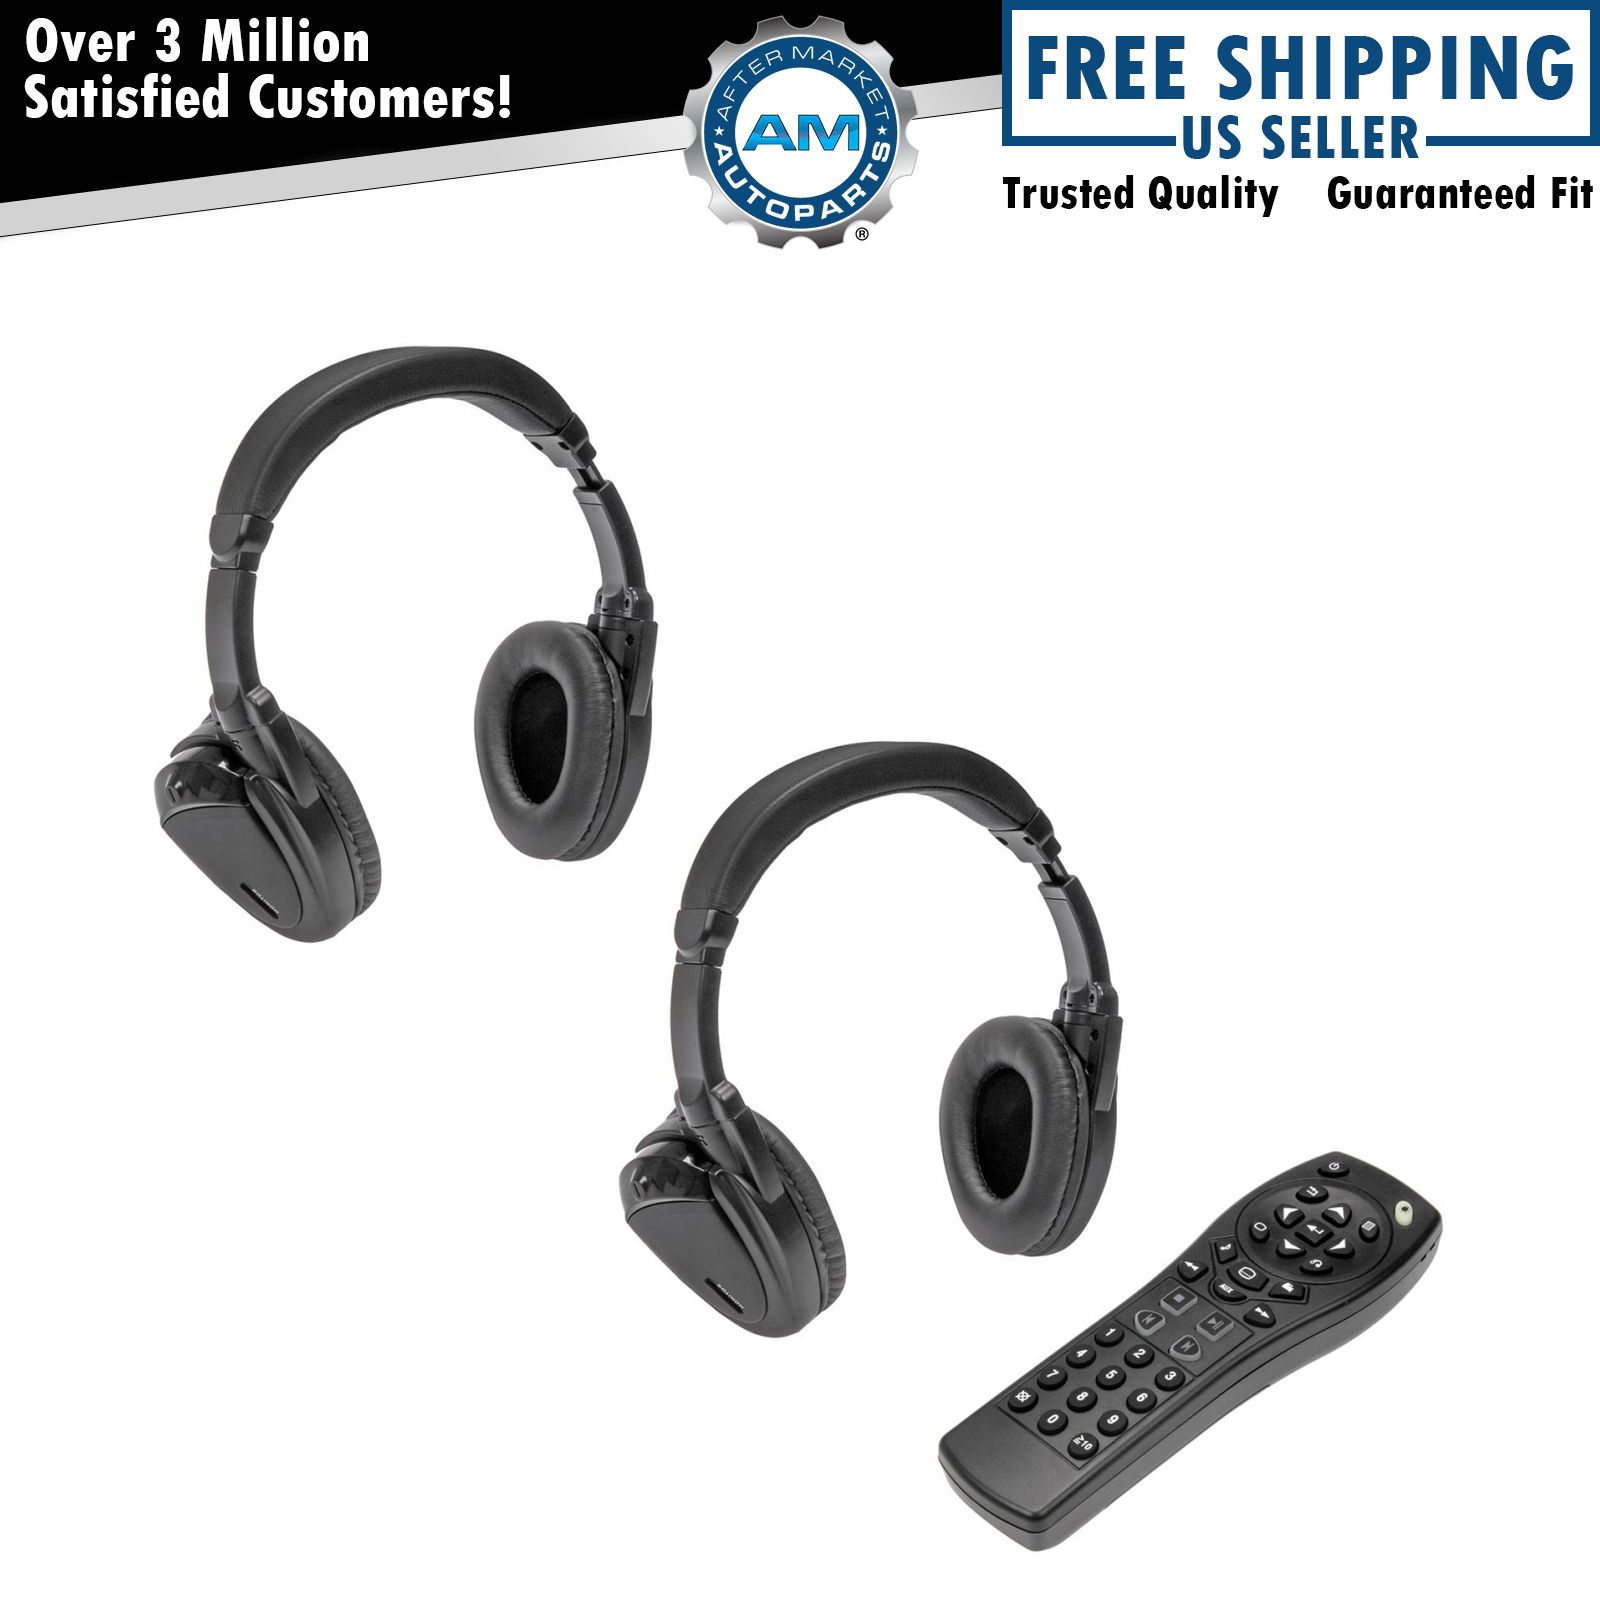 Dorman 2 Wireless Headphones & Remote Control for Chevy Cadillac GMC Buick